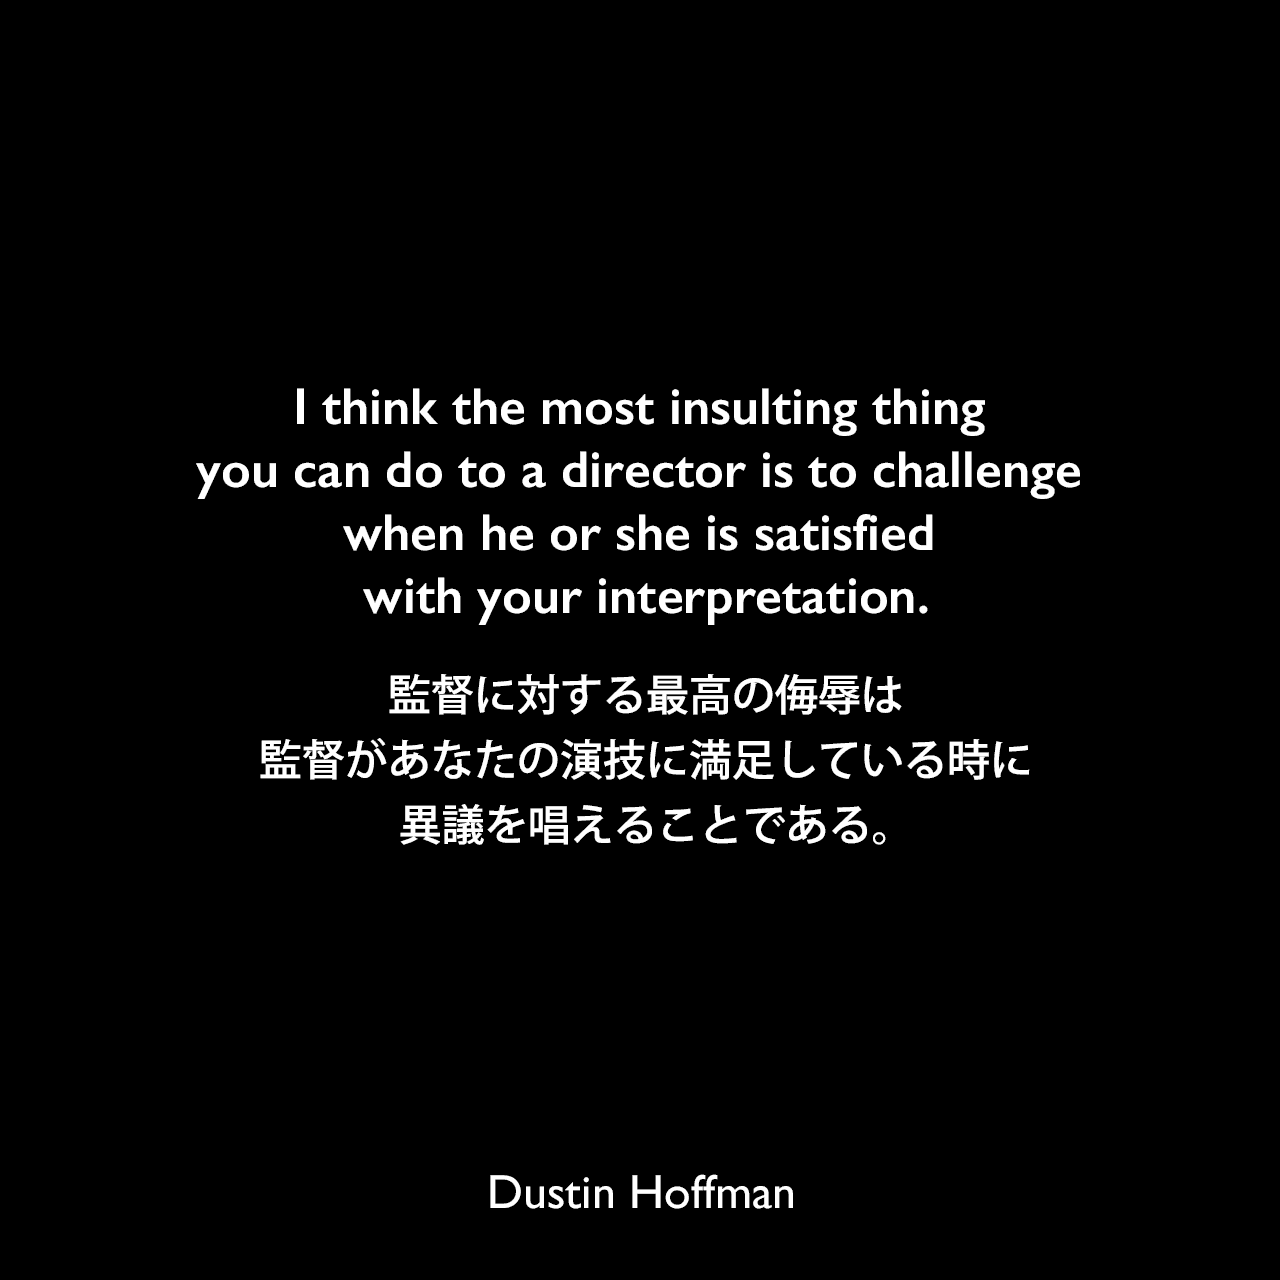 I think the most insulting thing you can do to a director is to challenge when he or she is satisfied with your interpretation.監督に対する最高の侮辱は、監督があなたの演技に満足している時に異議を唱えることである。Dustin Hoffman